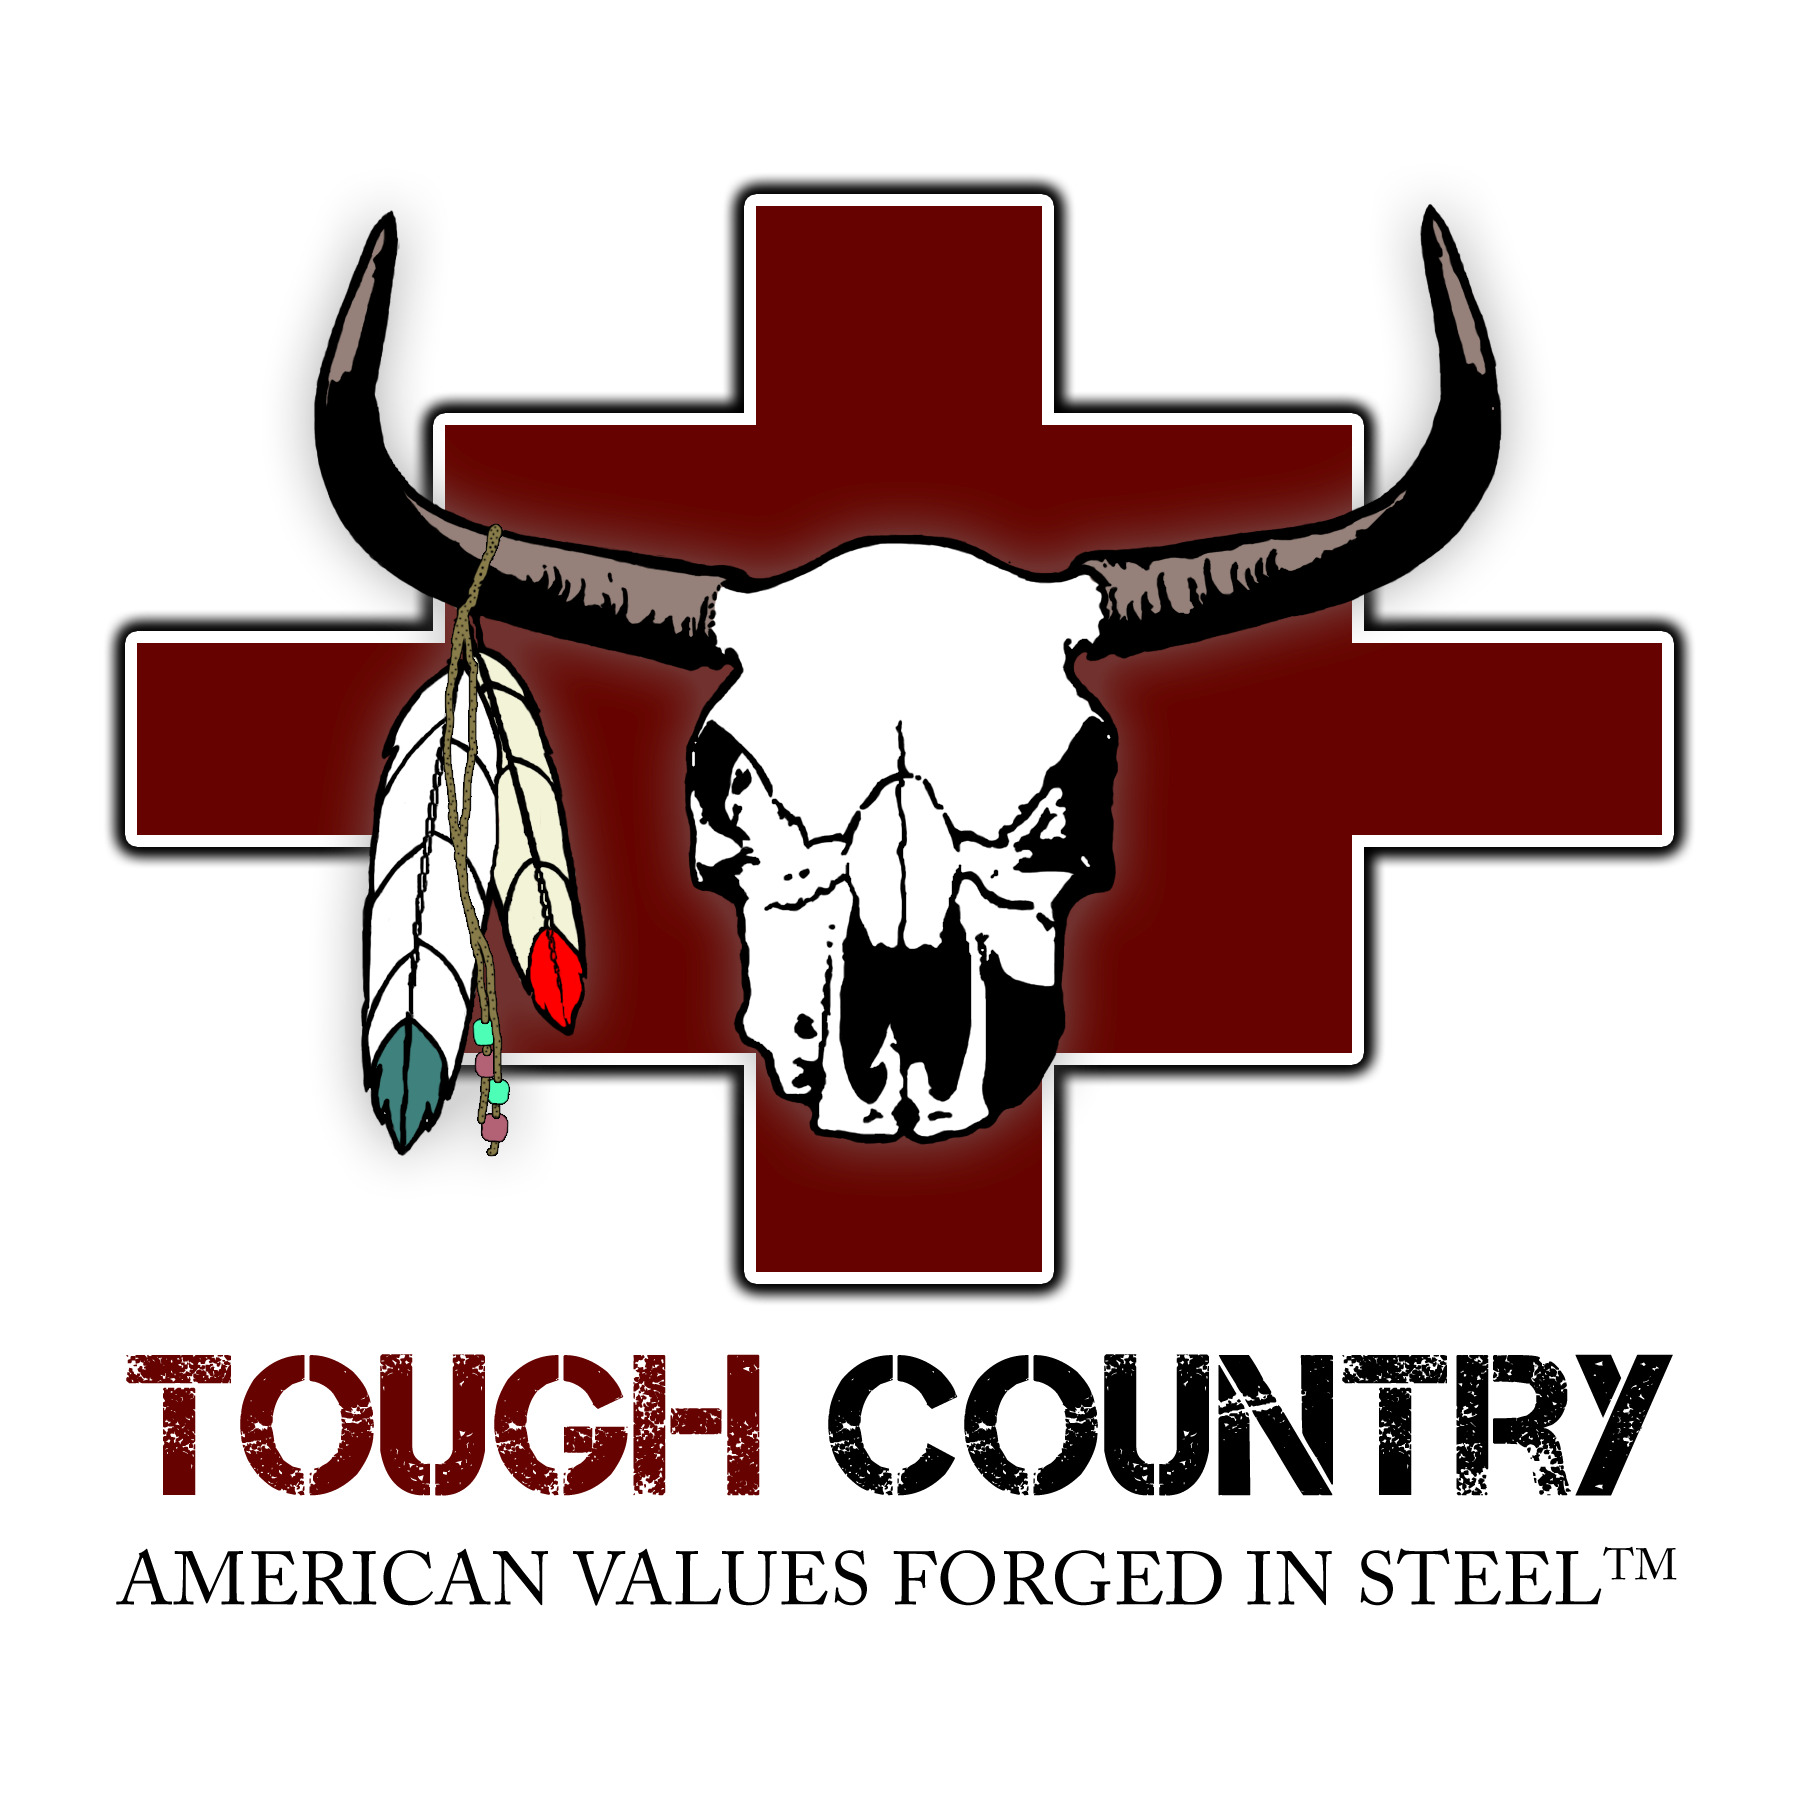 Tough Country Bumpers